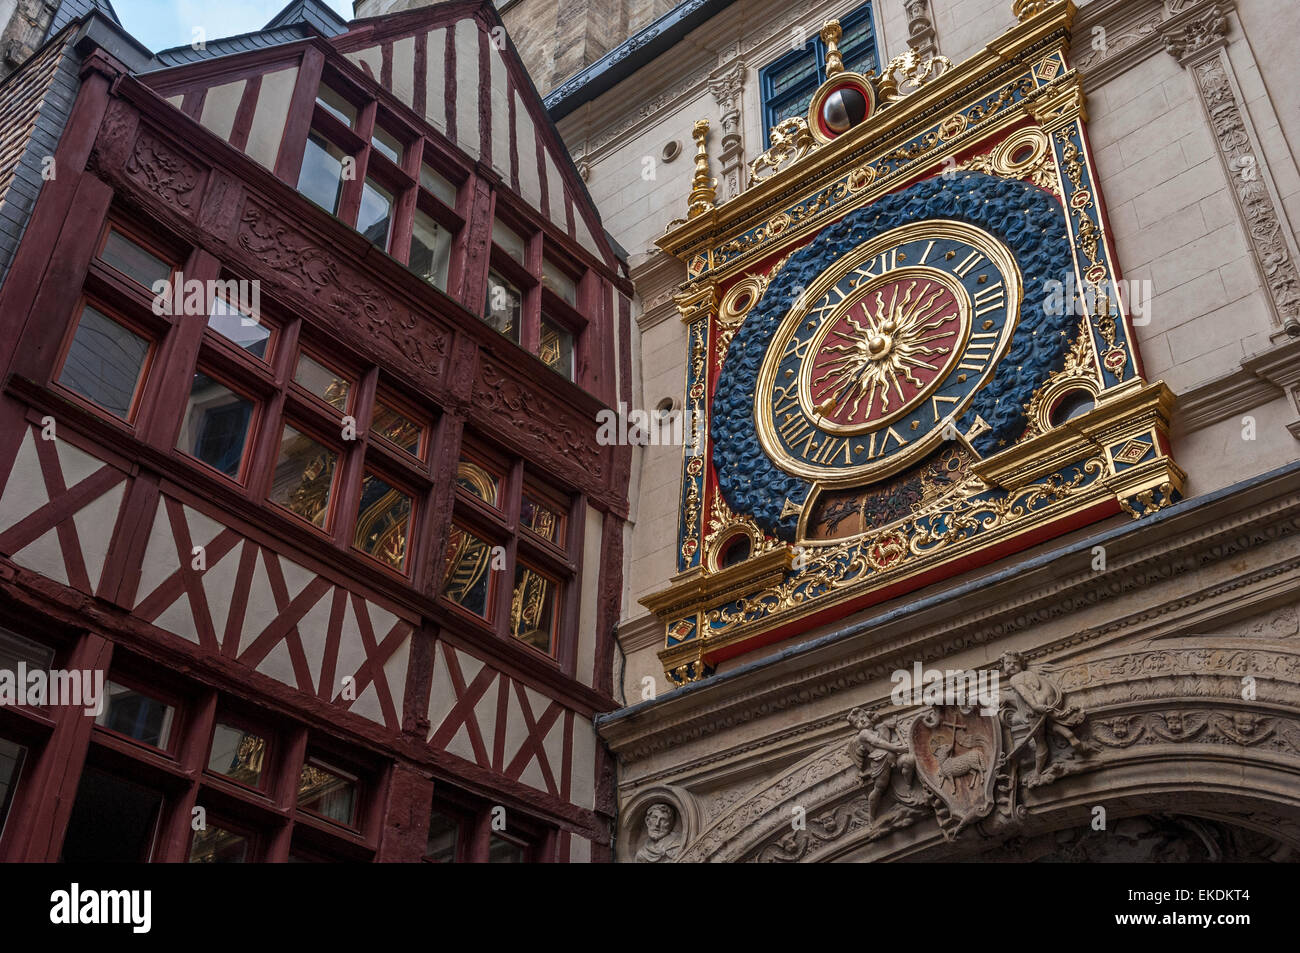 The great clock ( Le Gros Horloge). Rouen. Normandy. France Stock Photo